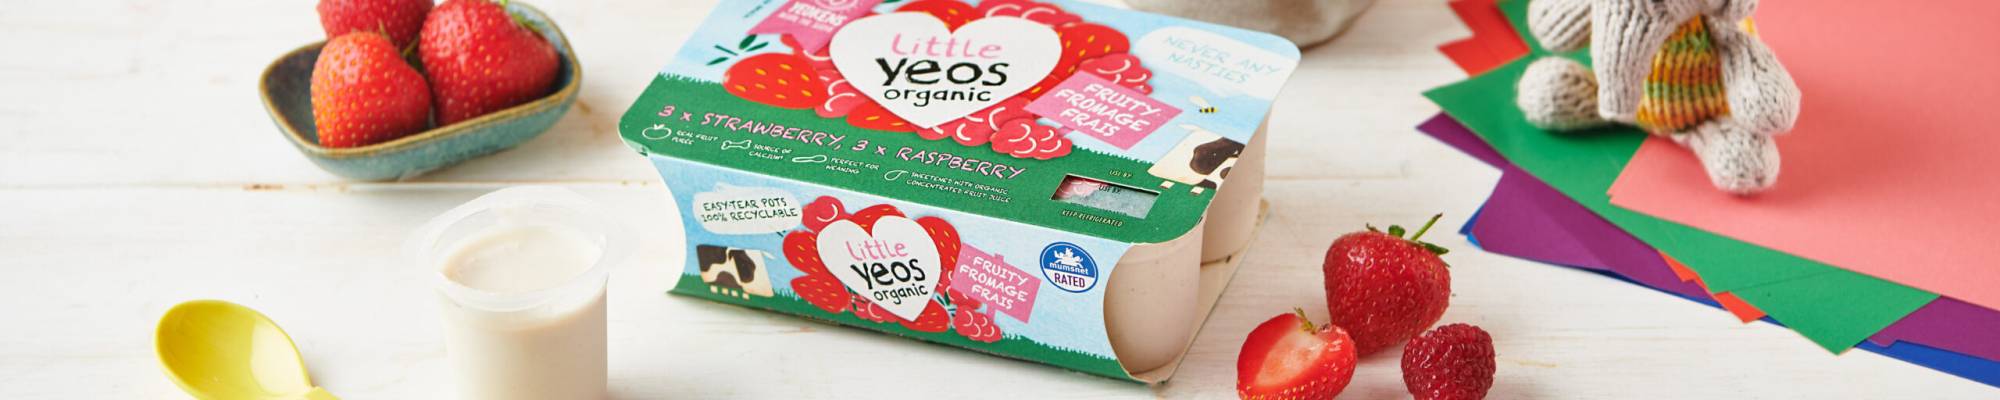 Yeo Valley Organic Little Yeos fromage frais